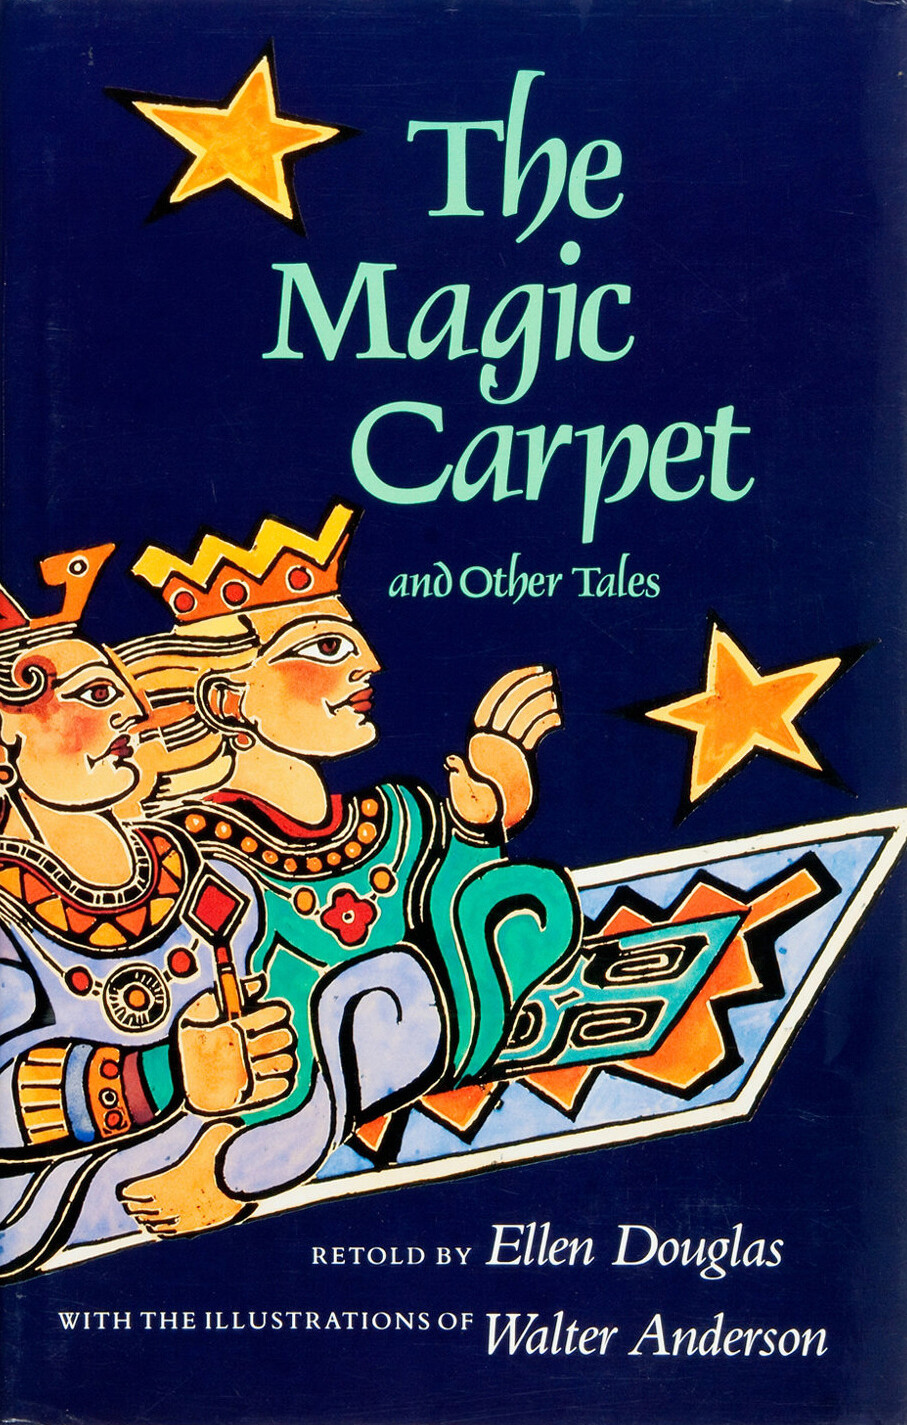 The Magic Carpet and other tales